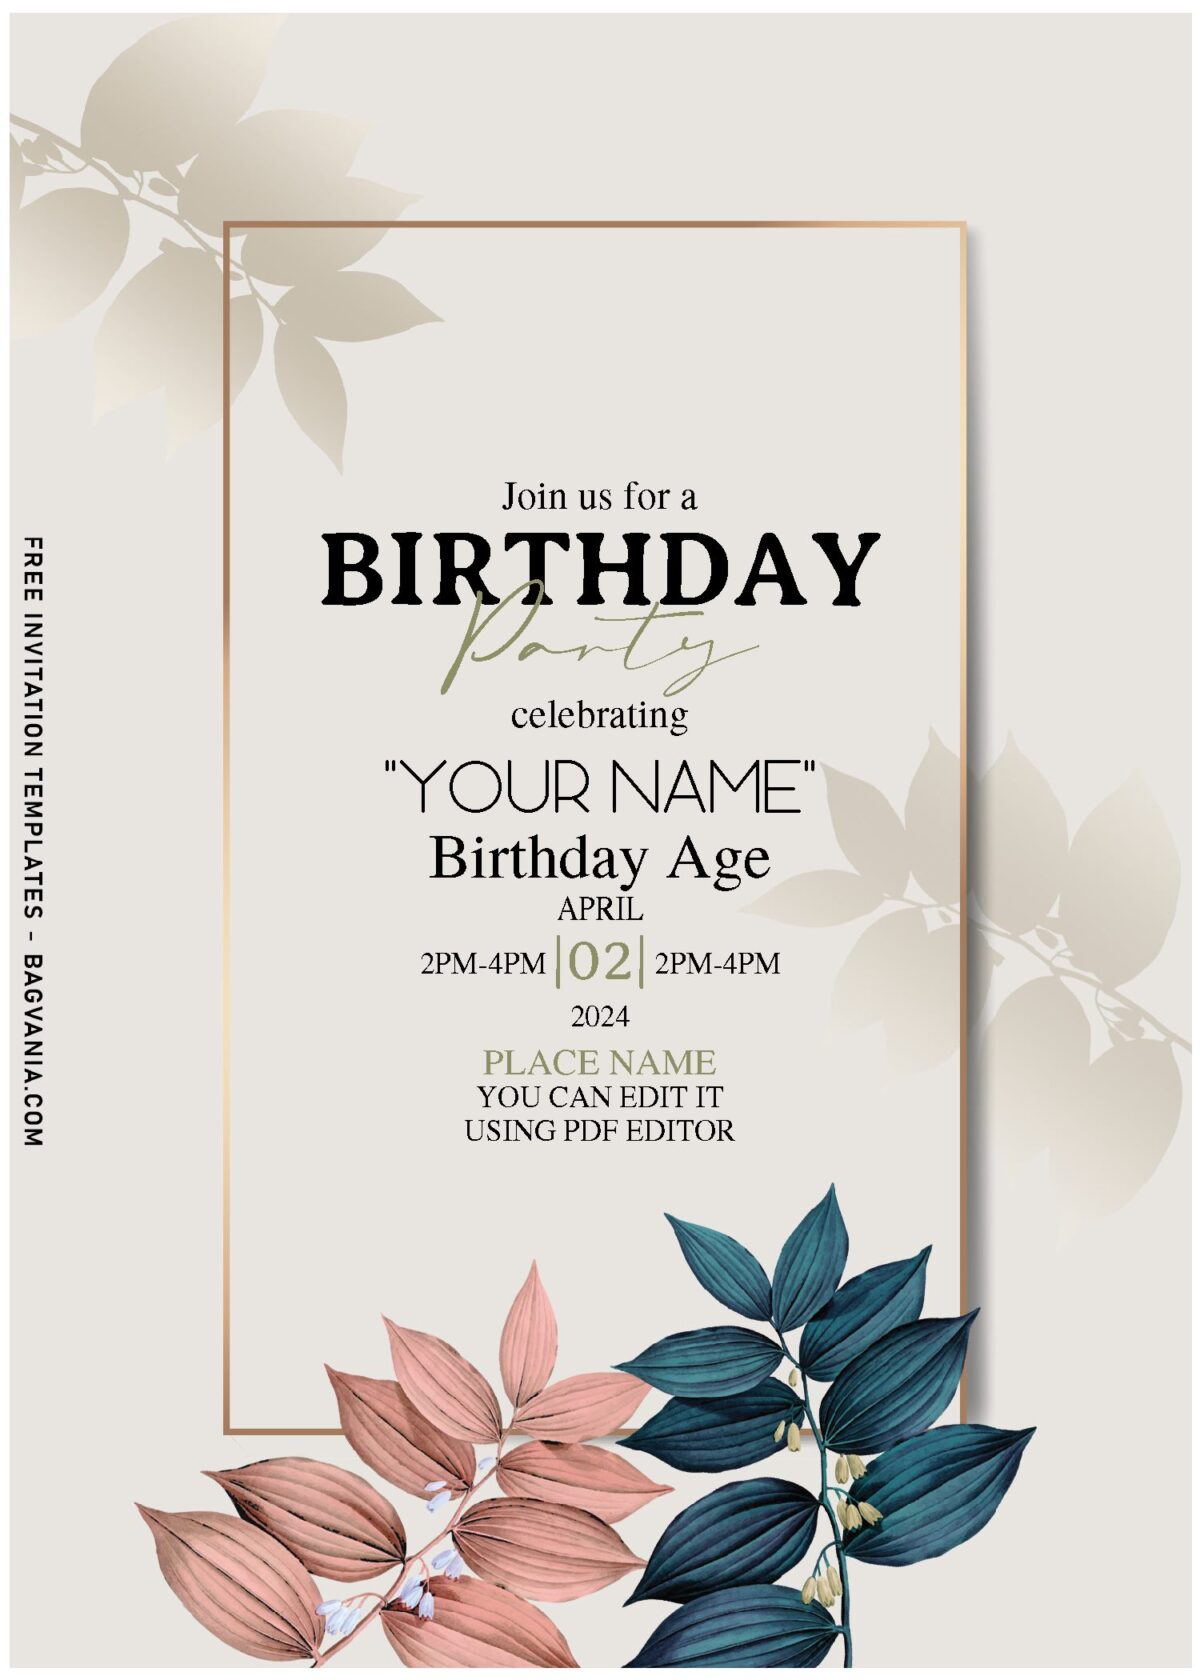 (Free Editable PDF) Garden Leaves Invitation Templates For Summer Celebrations with dried foliage